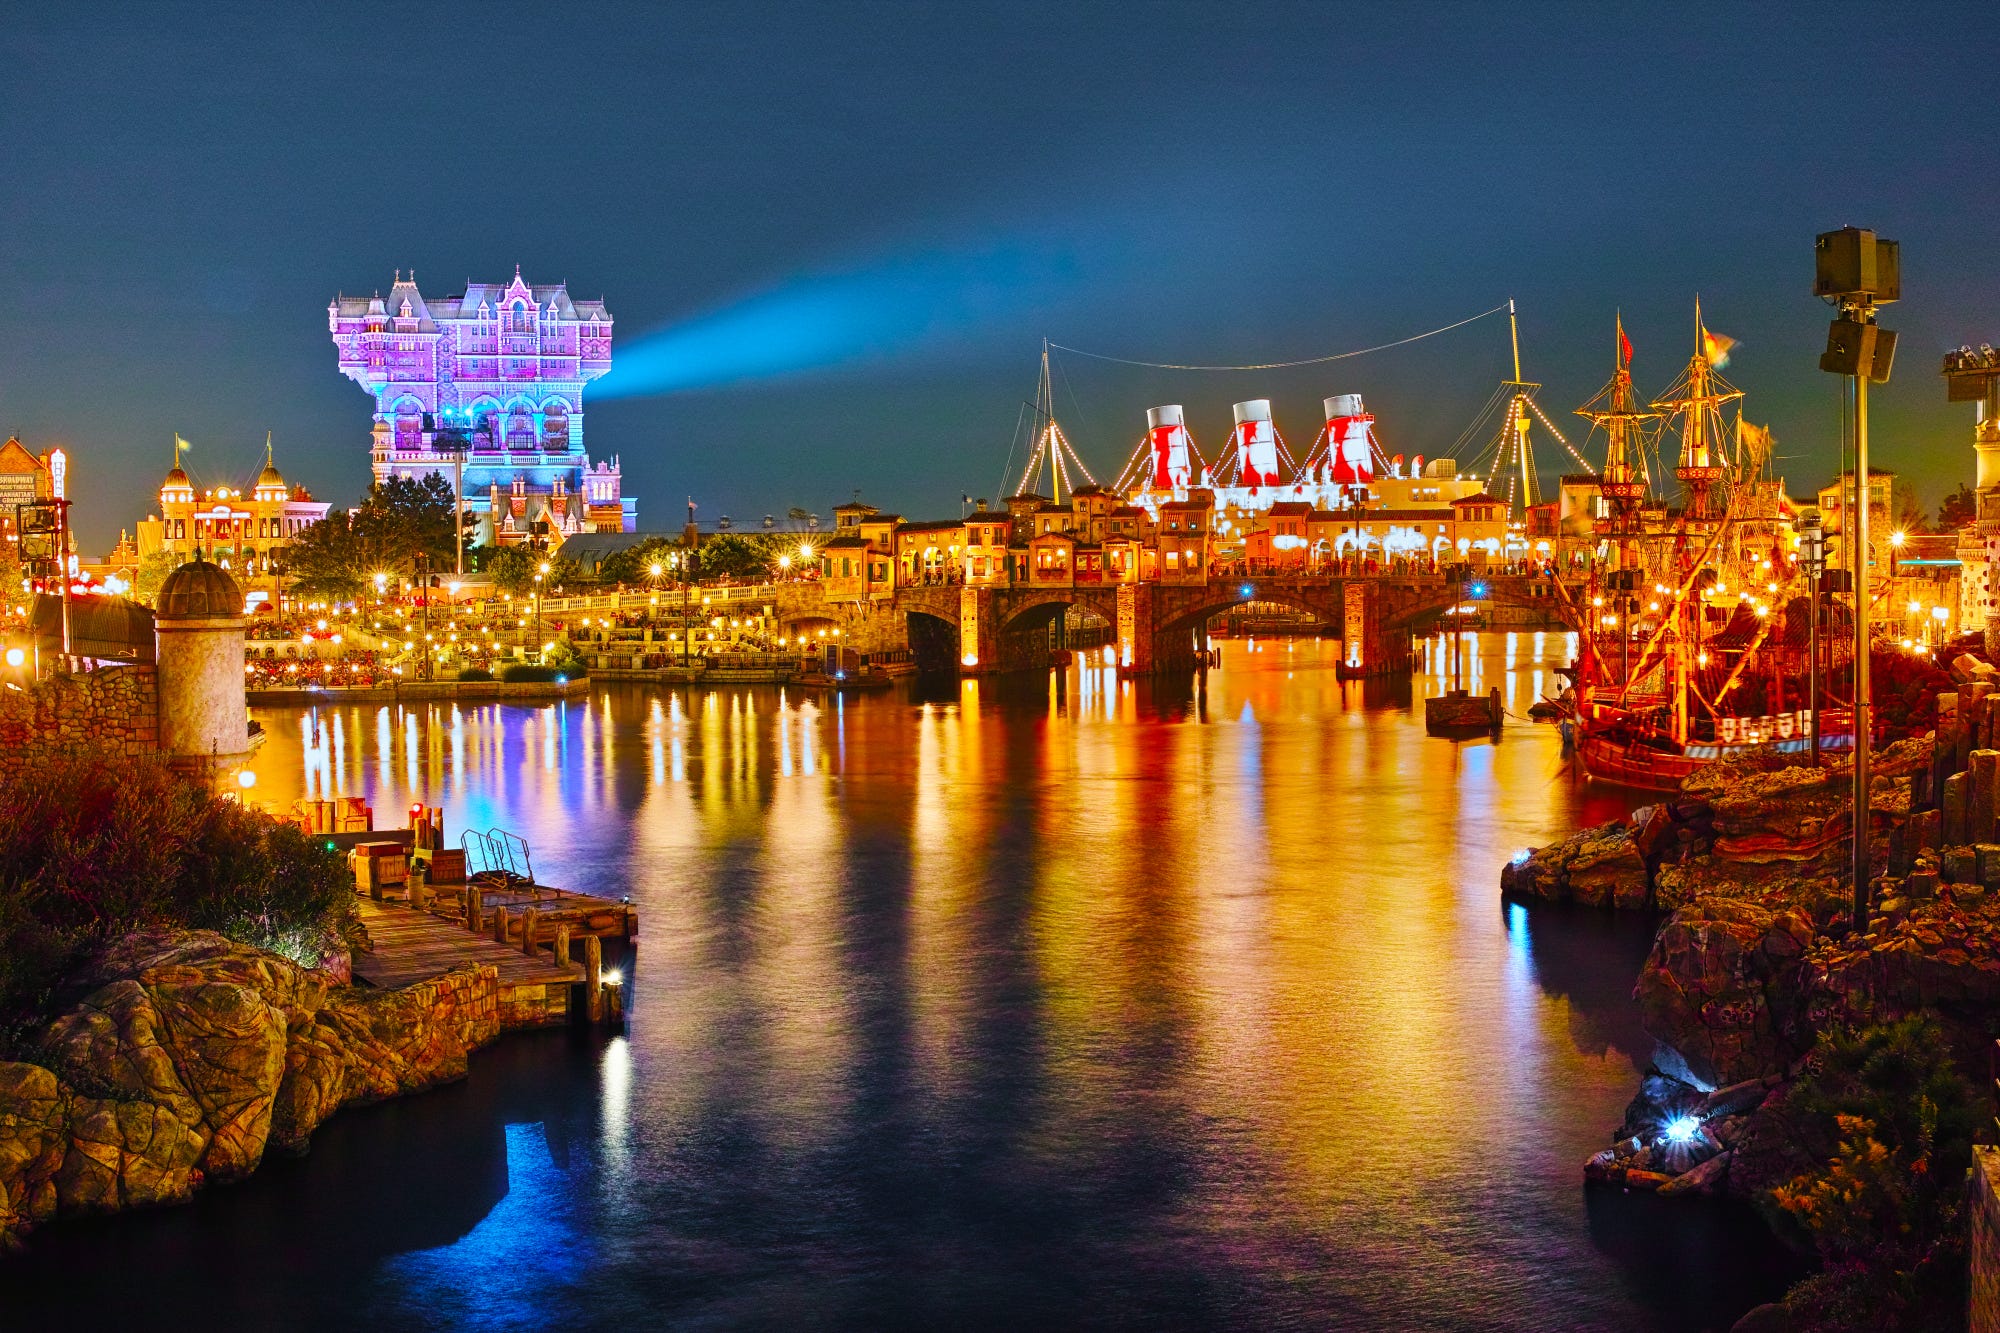 Tokyo DisneySea Ultimate Guide How to Enjoy to the Fullest in a Day